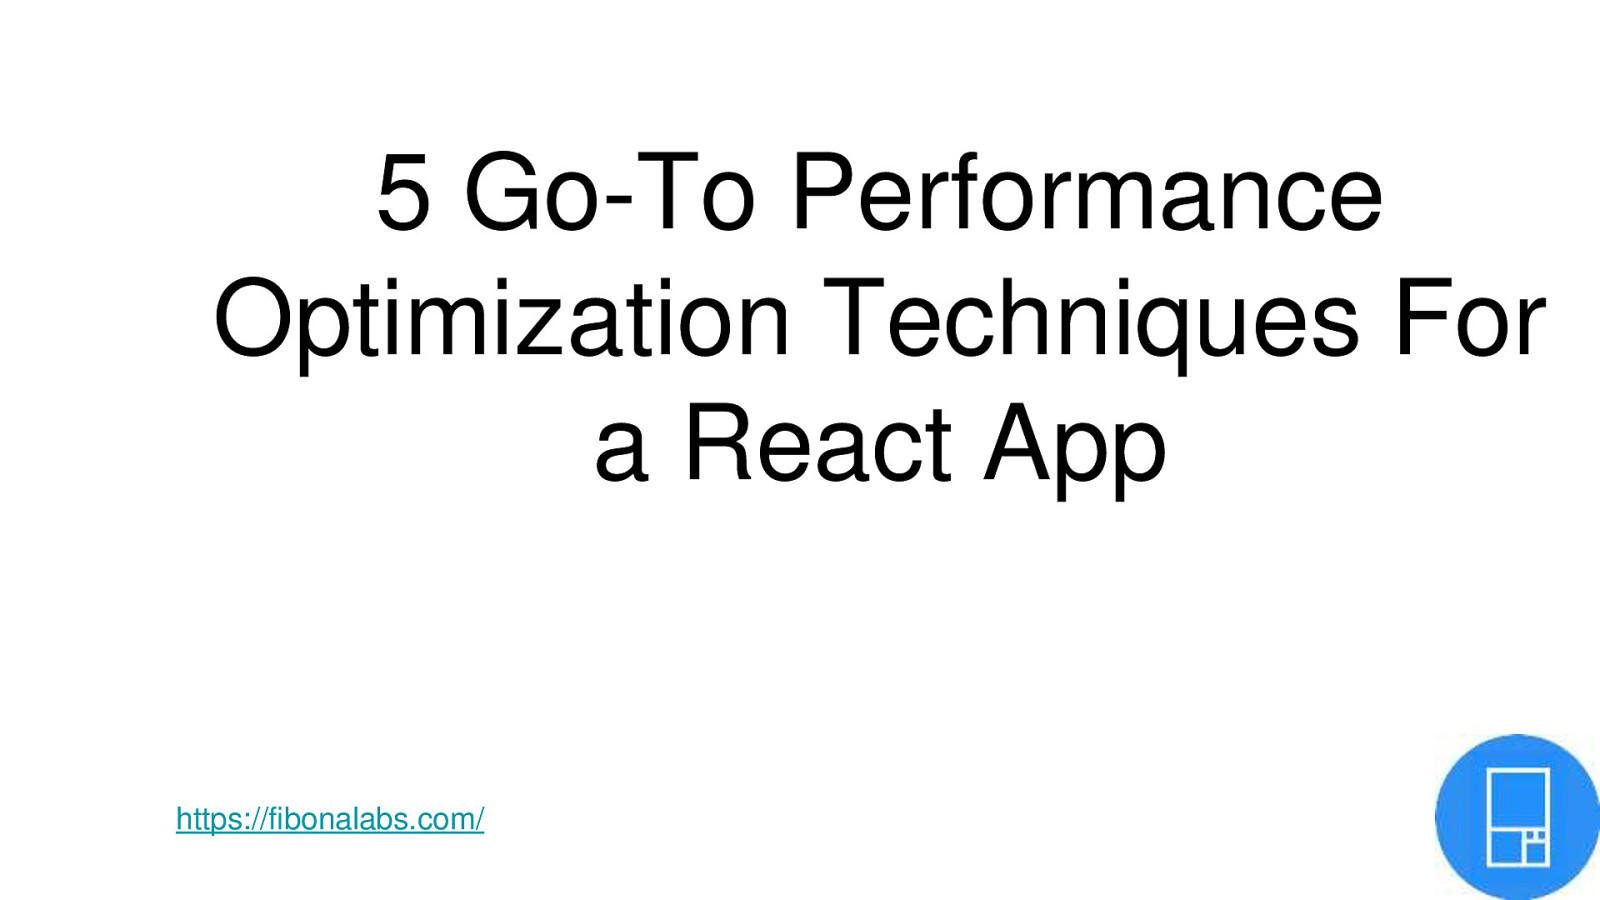 5 Go-To Performance Optimization Techniques For a React App